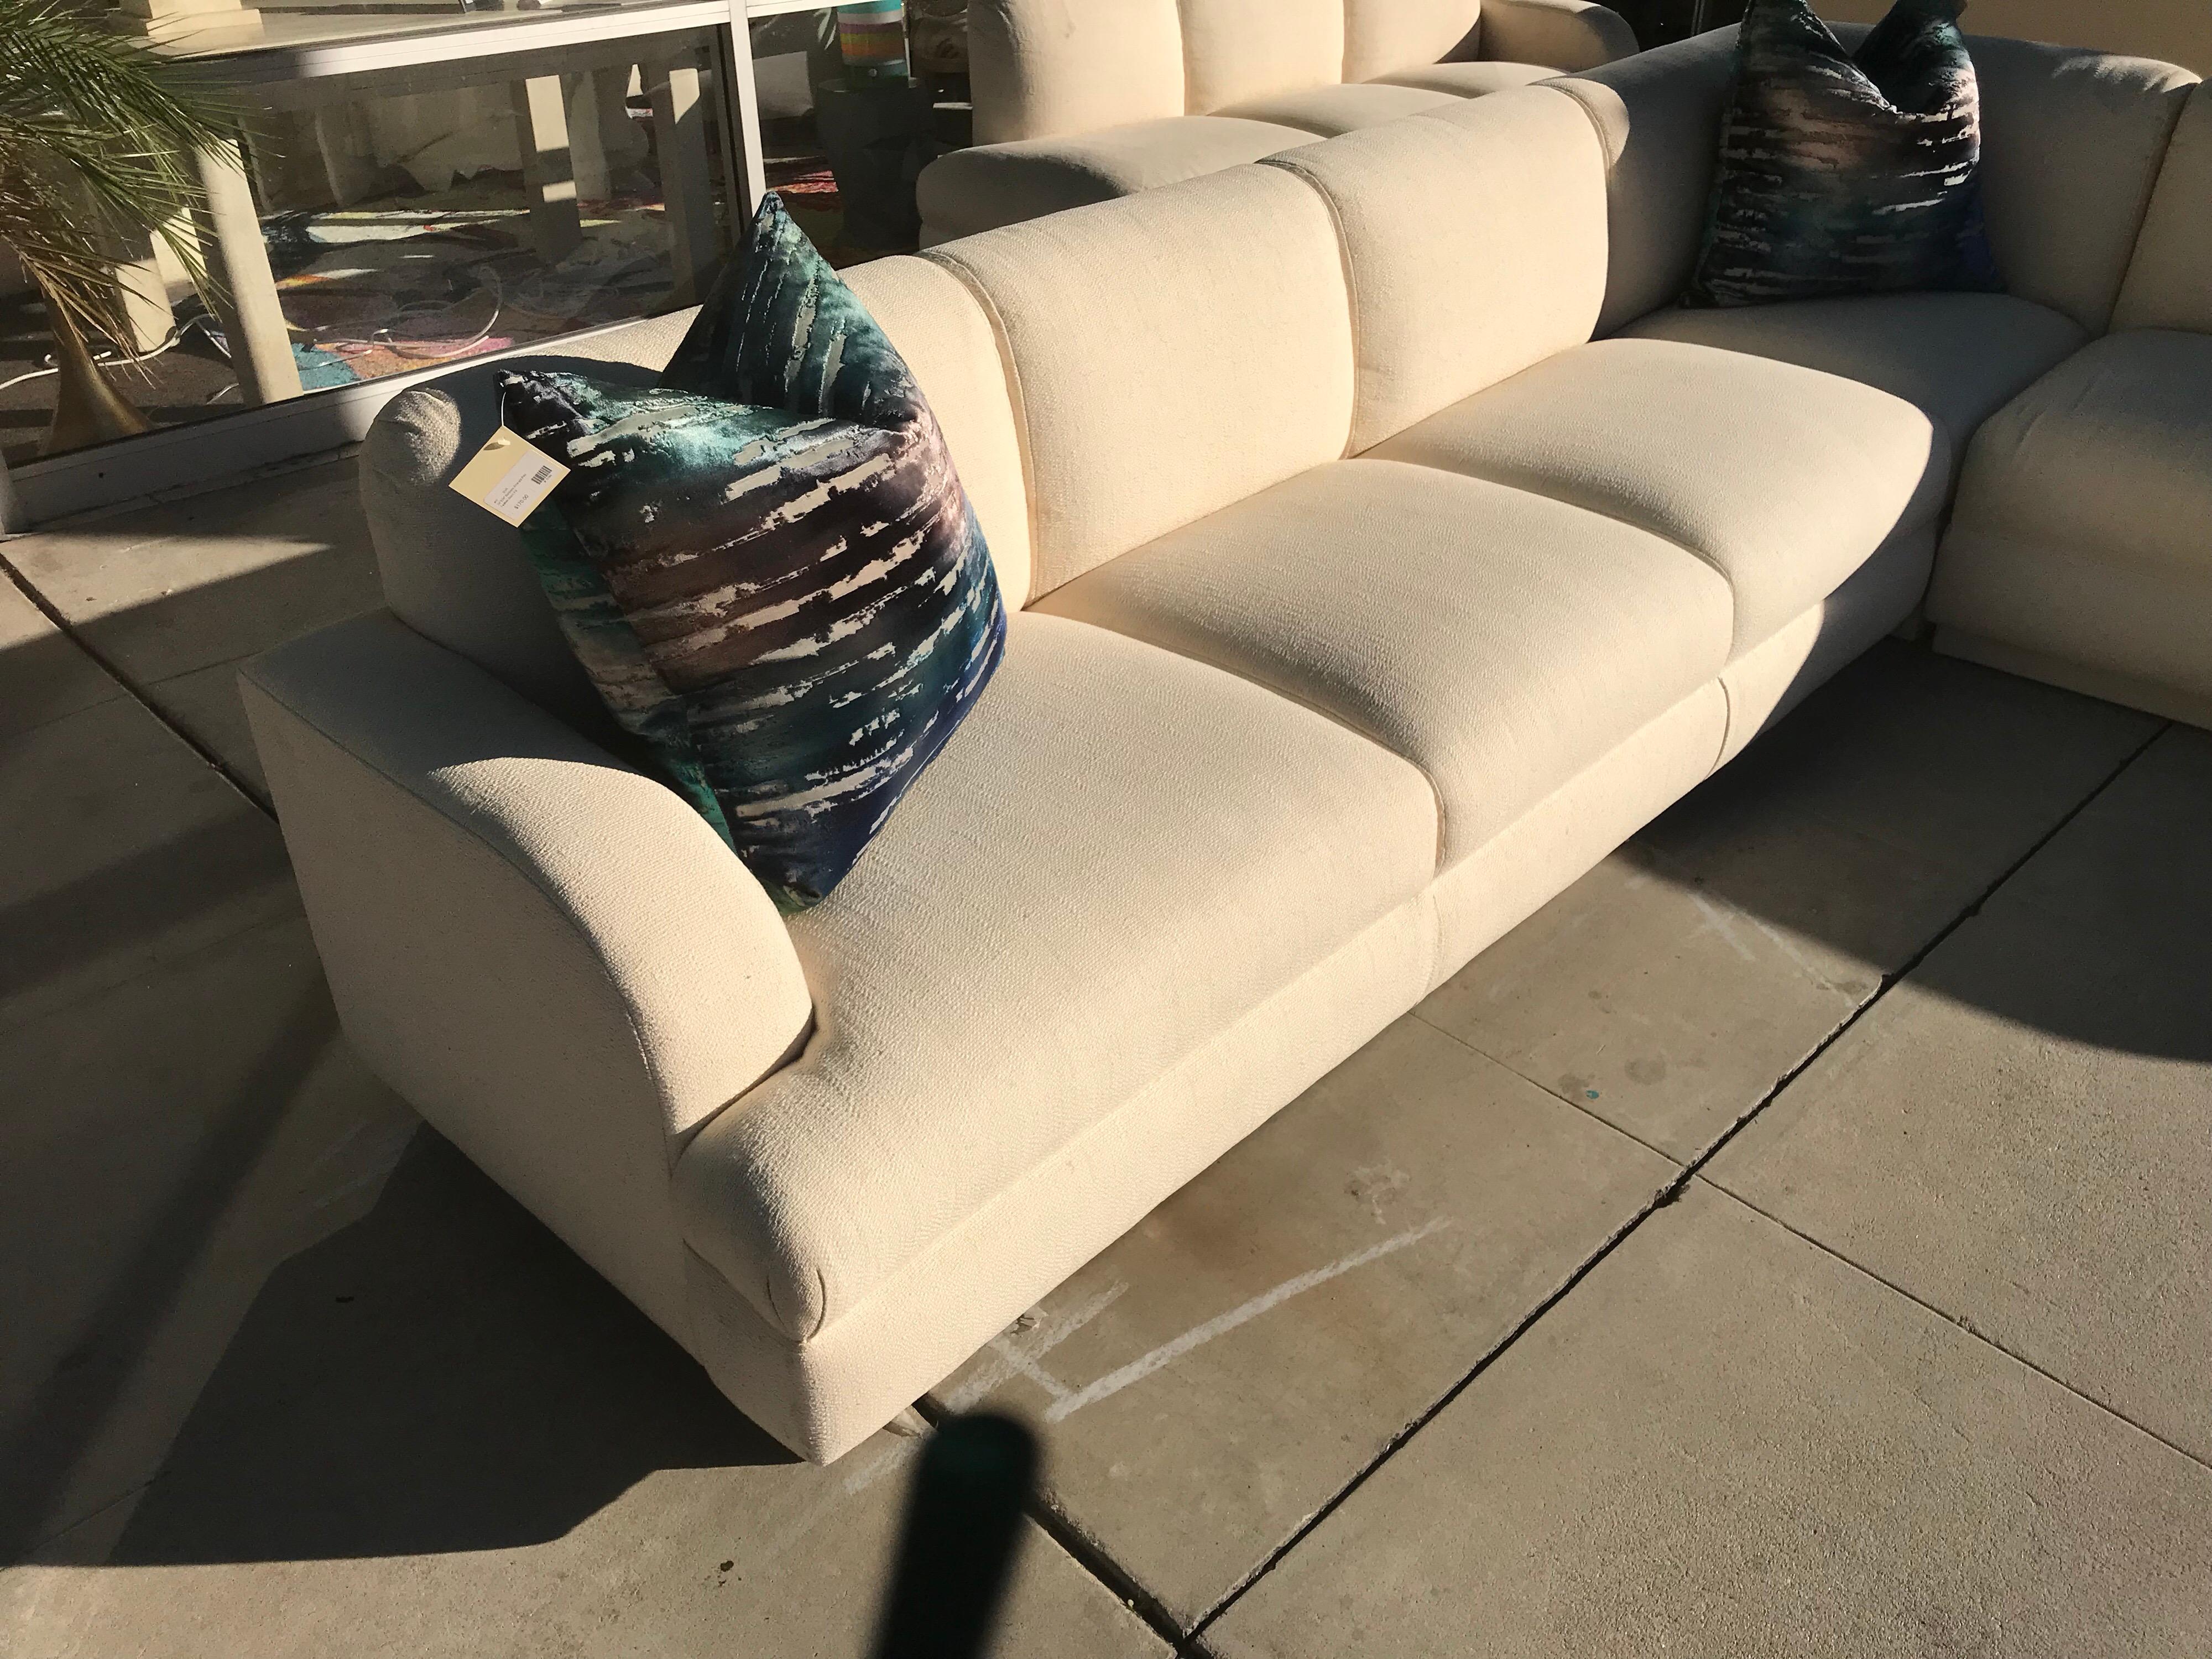 This amazing sectional came from the living room of an extremely large vintage Rancho Mirage estate design by the late Steve Chase. All the upholstered pieces including the sectional in this listing are done in the same textured off-white designer